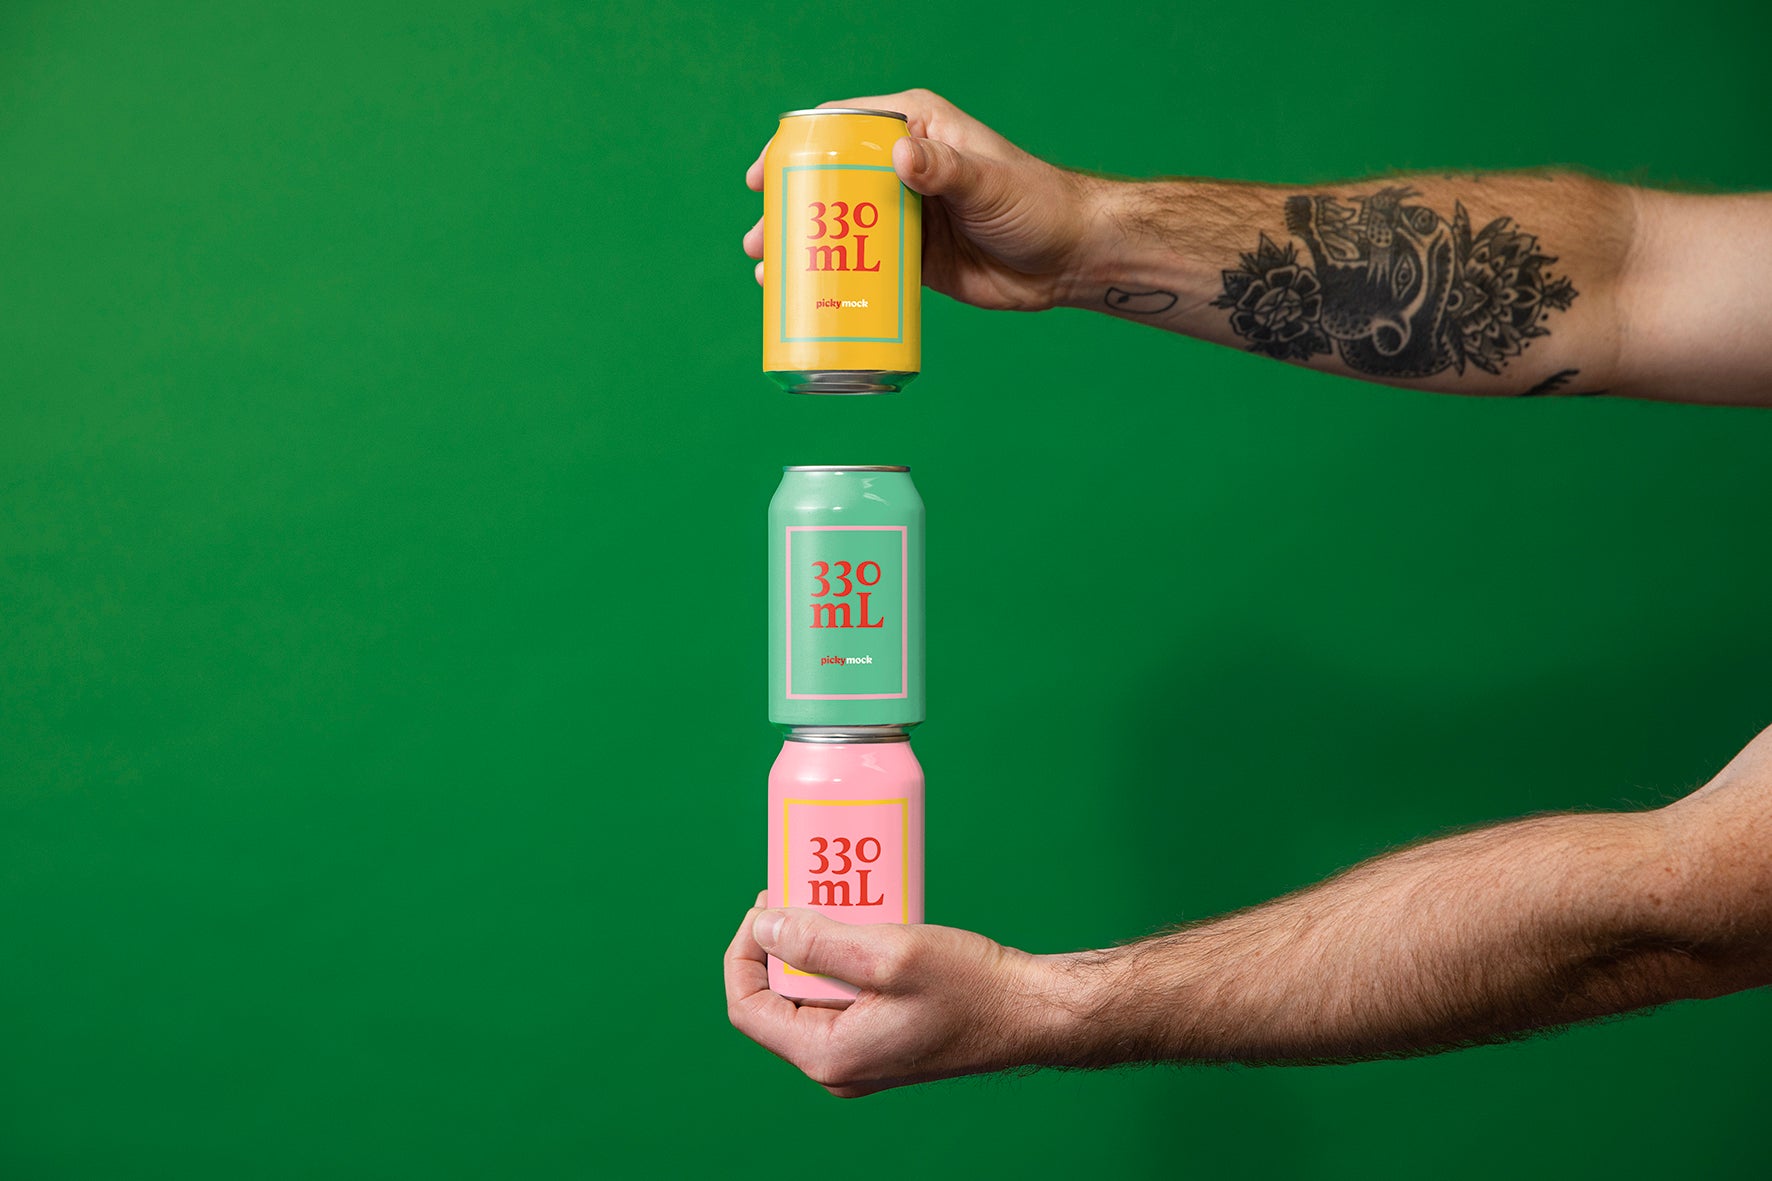 Tattooed arms hold out three cans stacked. Against a green studio backdrop.